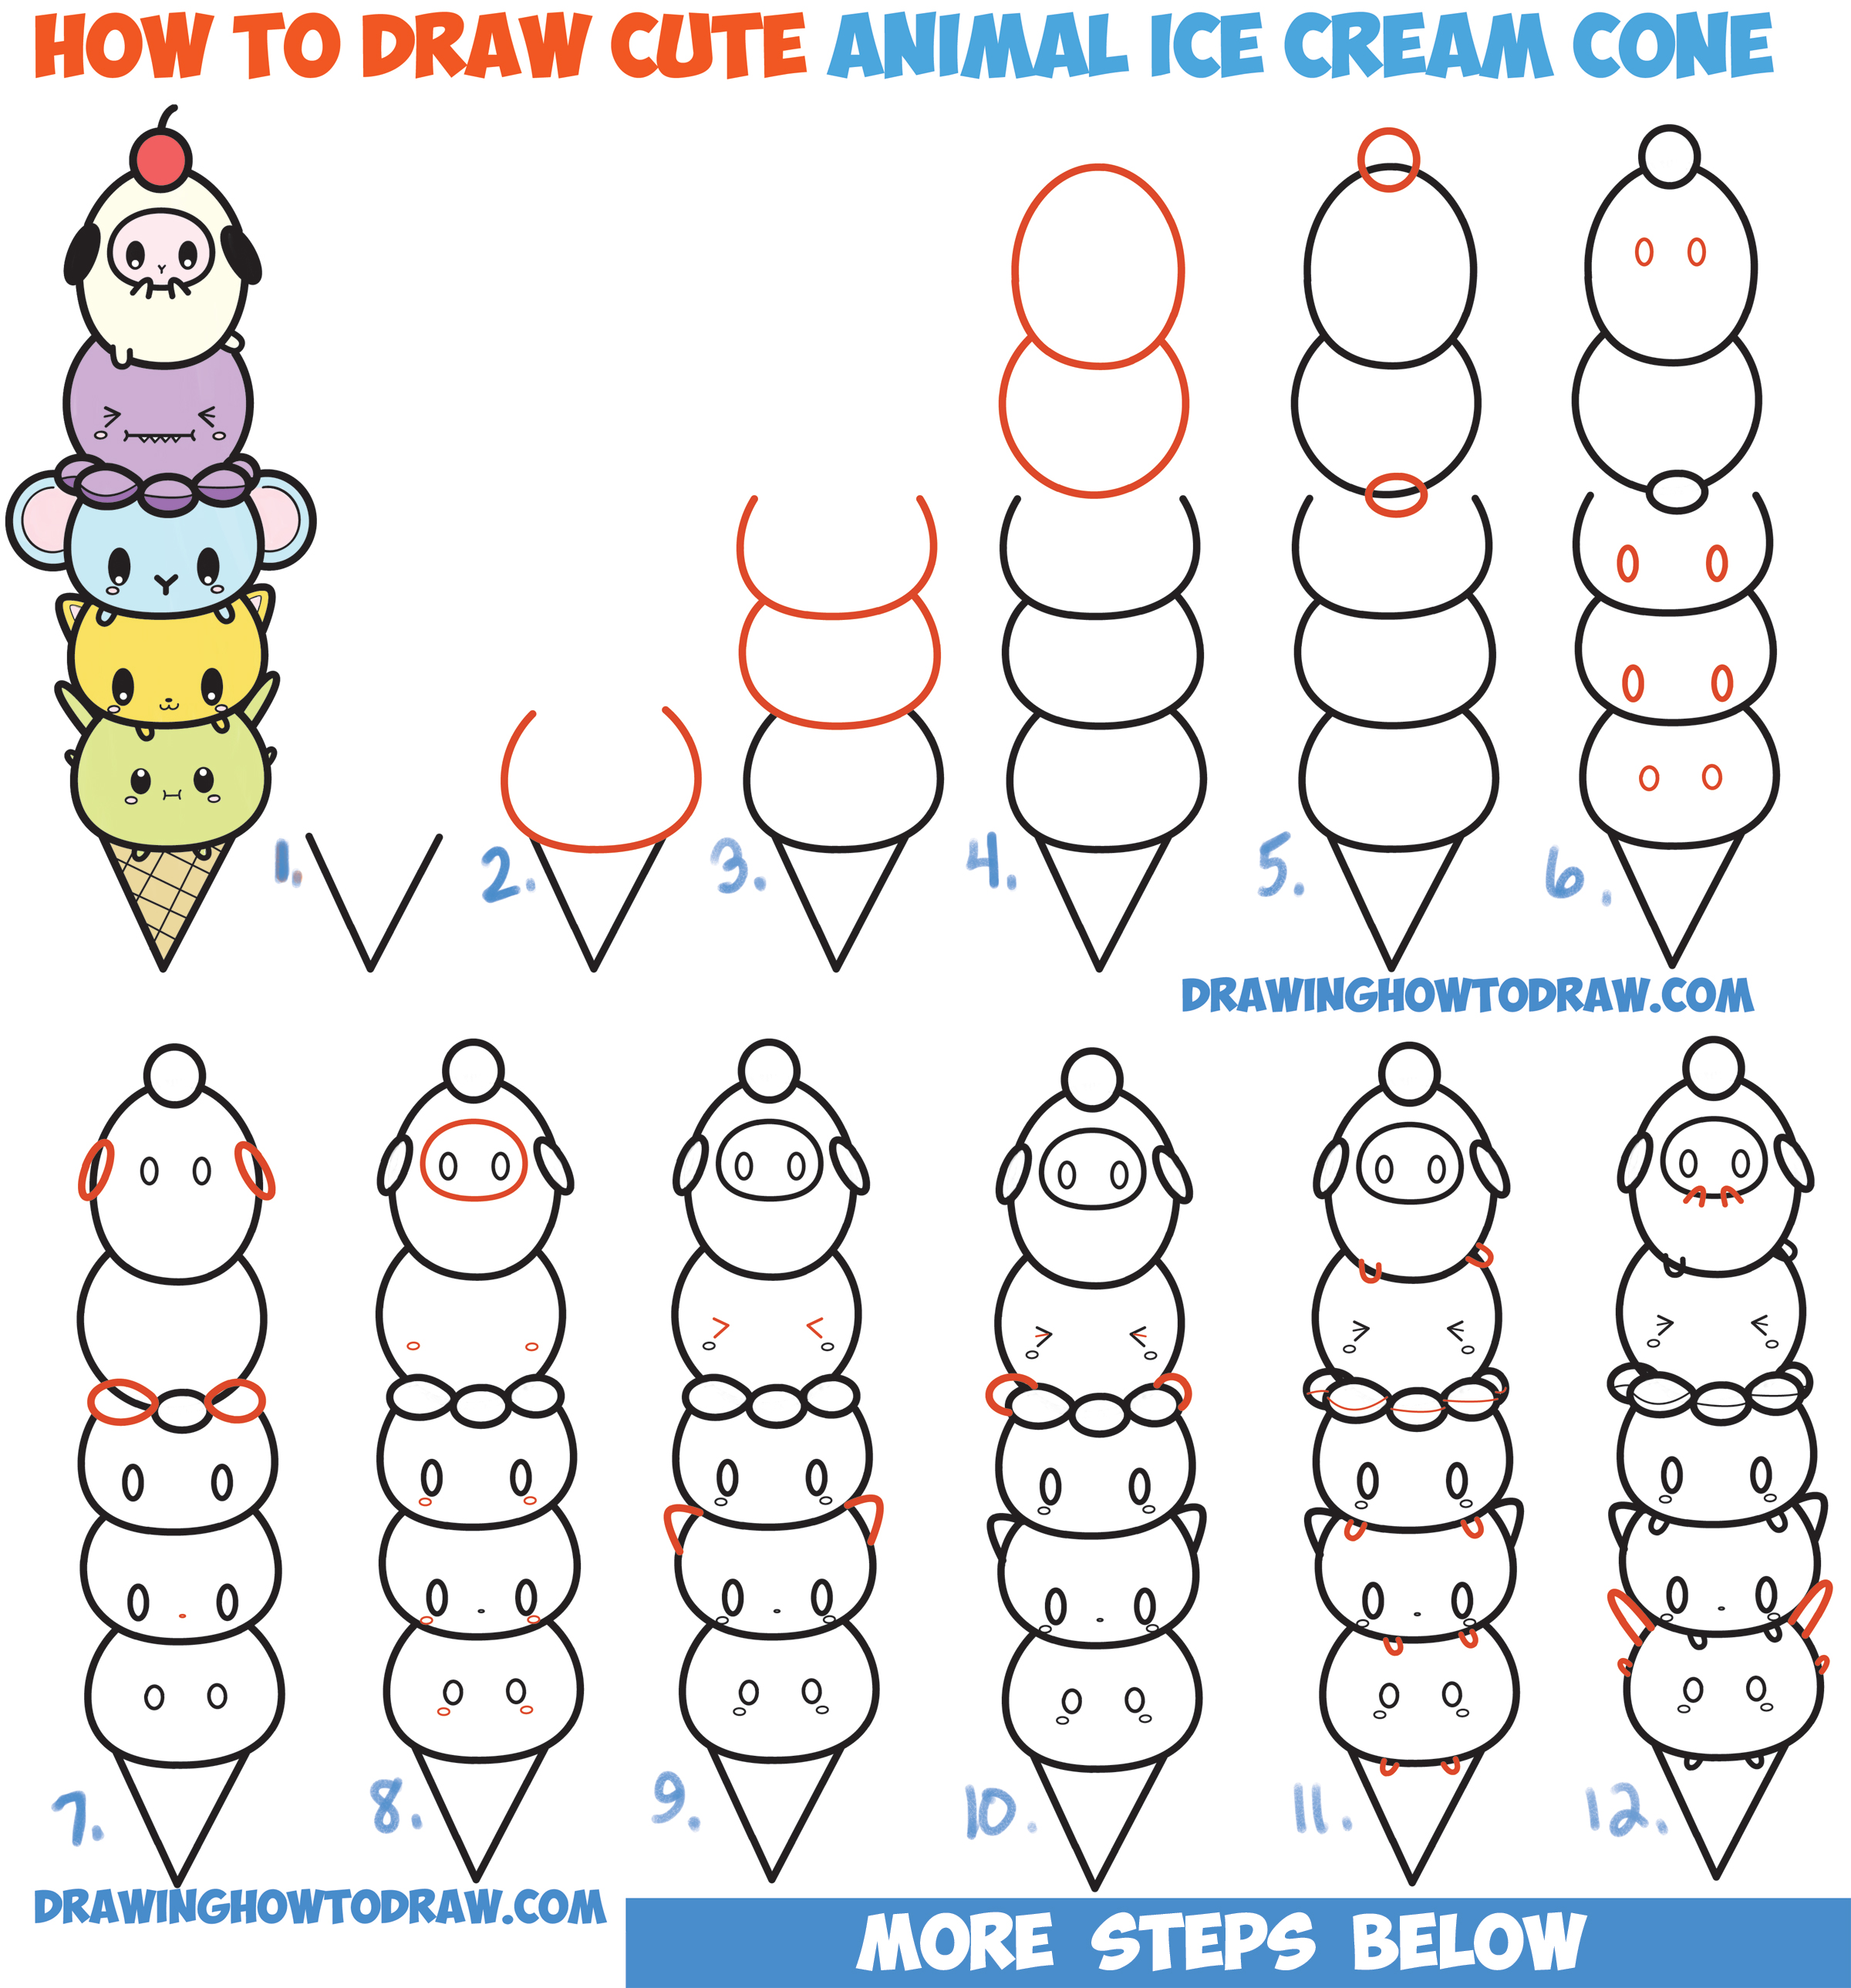 How to Draw Cute Kawaii Animals Stacked in Ice Cream Cone